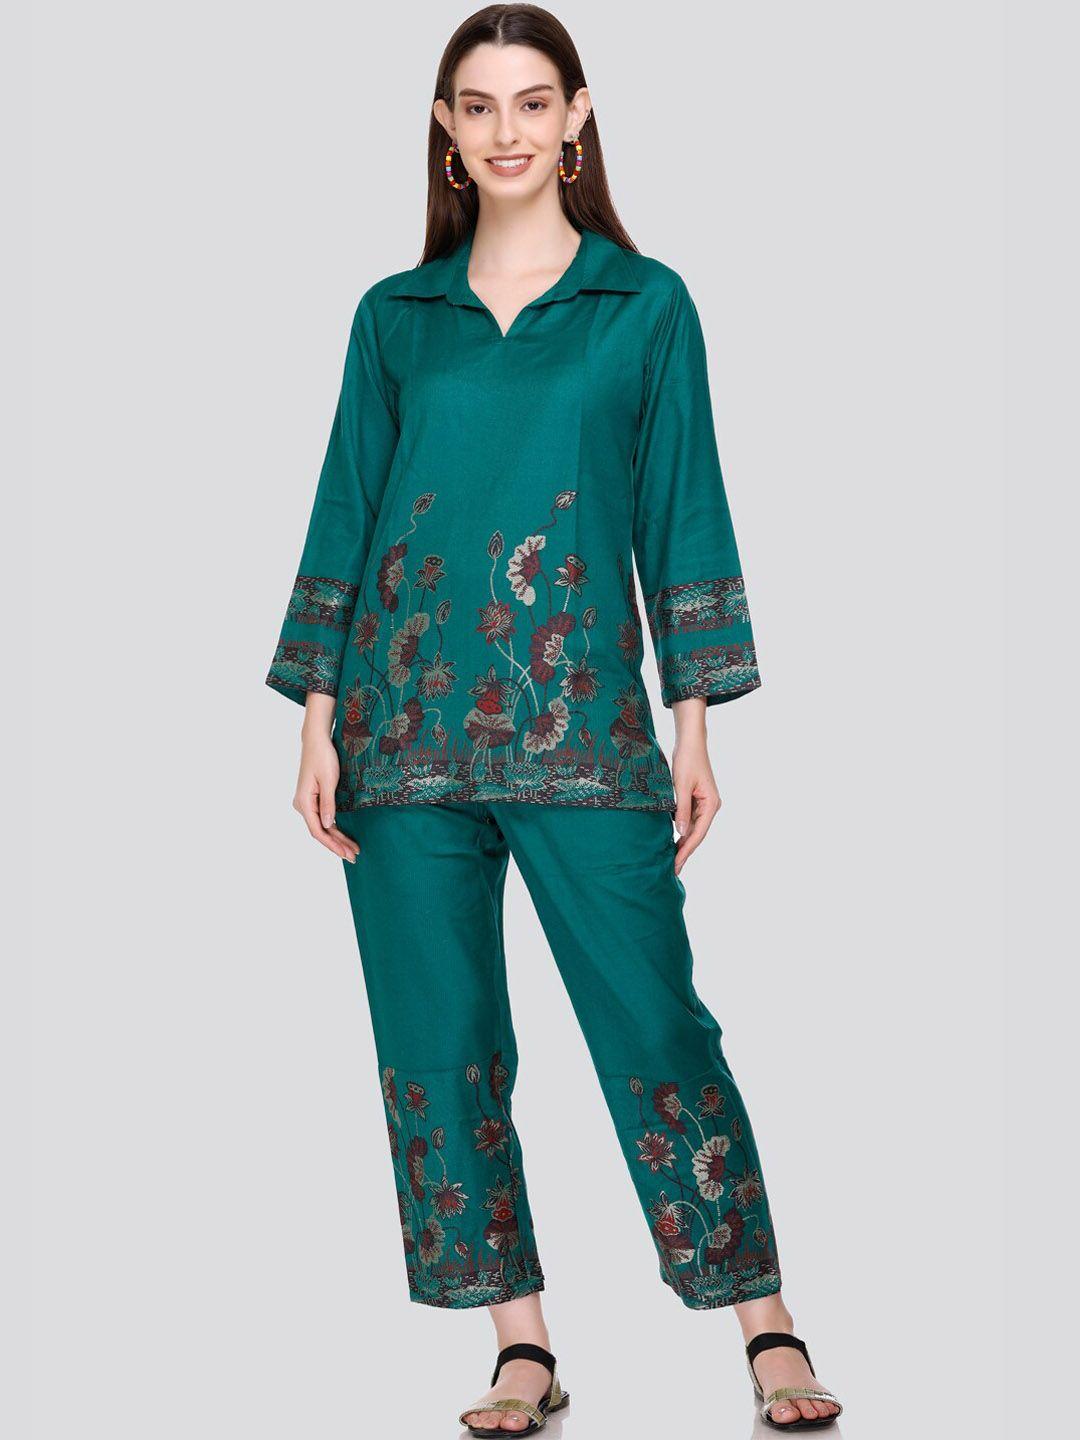 house of kirna's with logo of hok floral woven design acrylic tunic & trouser co-ords